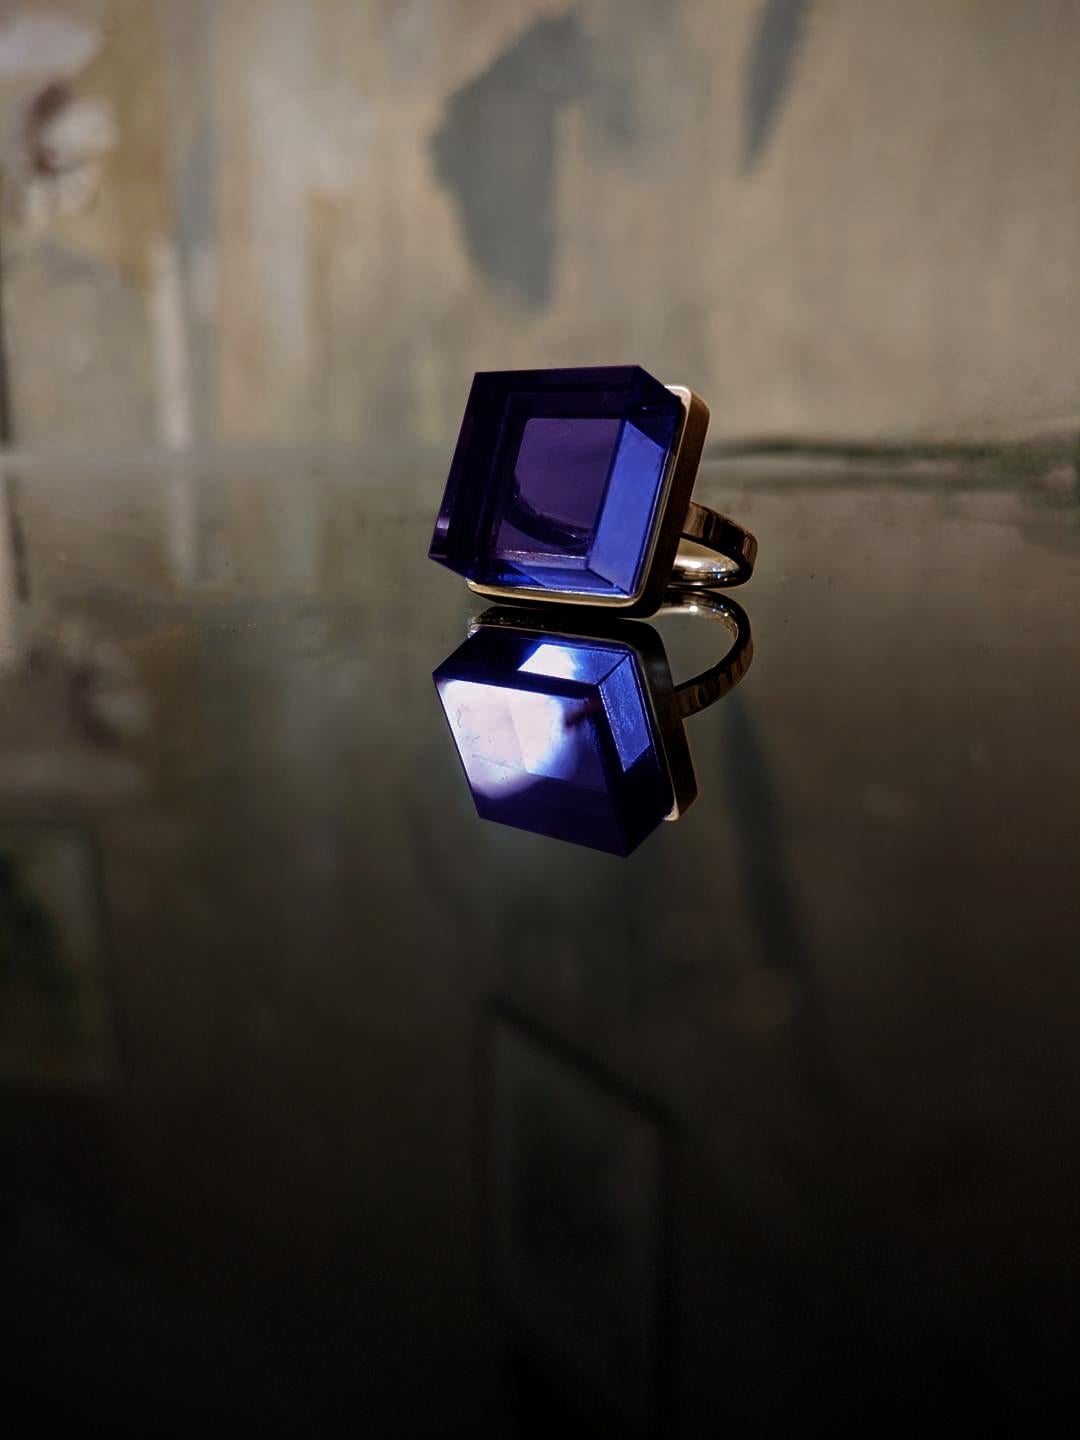 This Art Deco Style men's ring is crafted in 18 karat rose gold and features a 15x15x8 mm dark grown amethyst. The piece has been featured in Harper's Bazaar and Vogue UA. The ring is available in other colors, such as green amethyst, natural purple